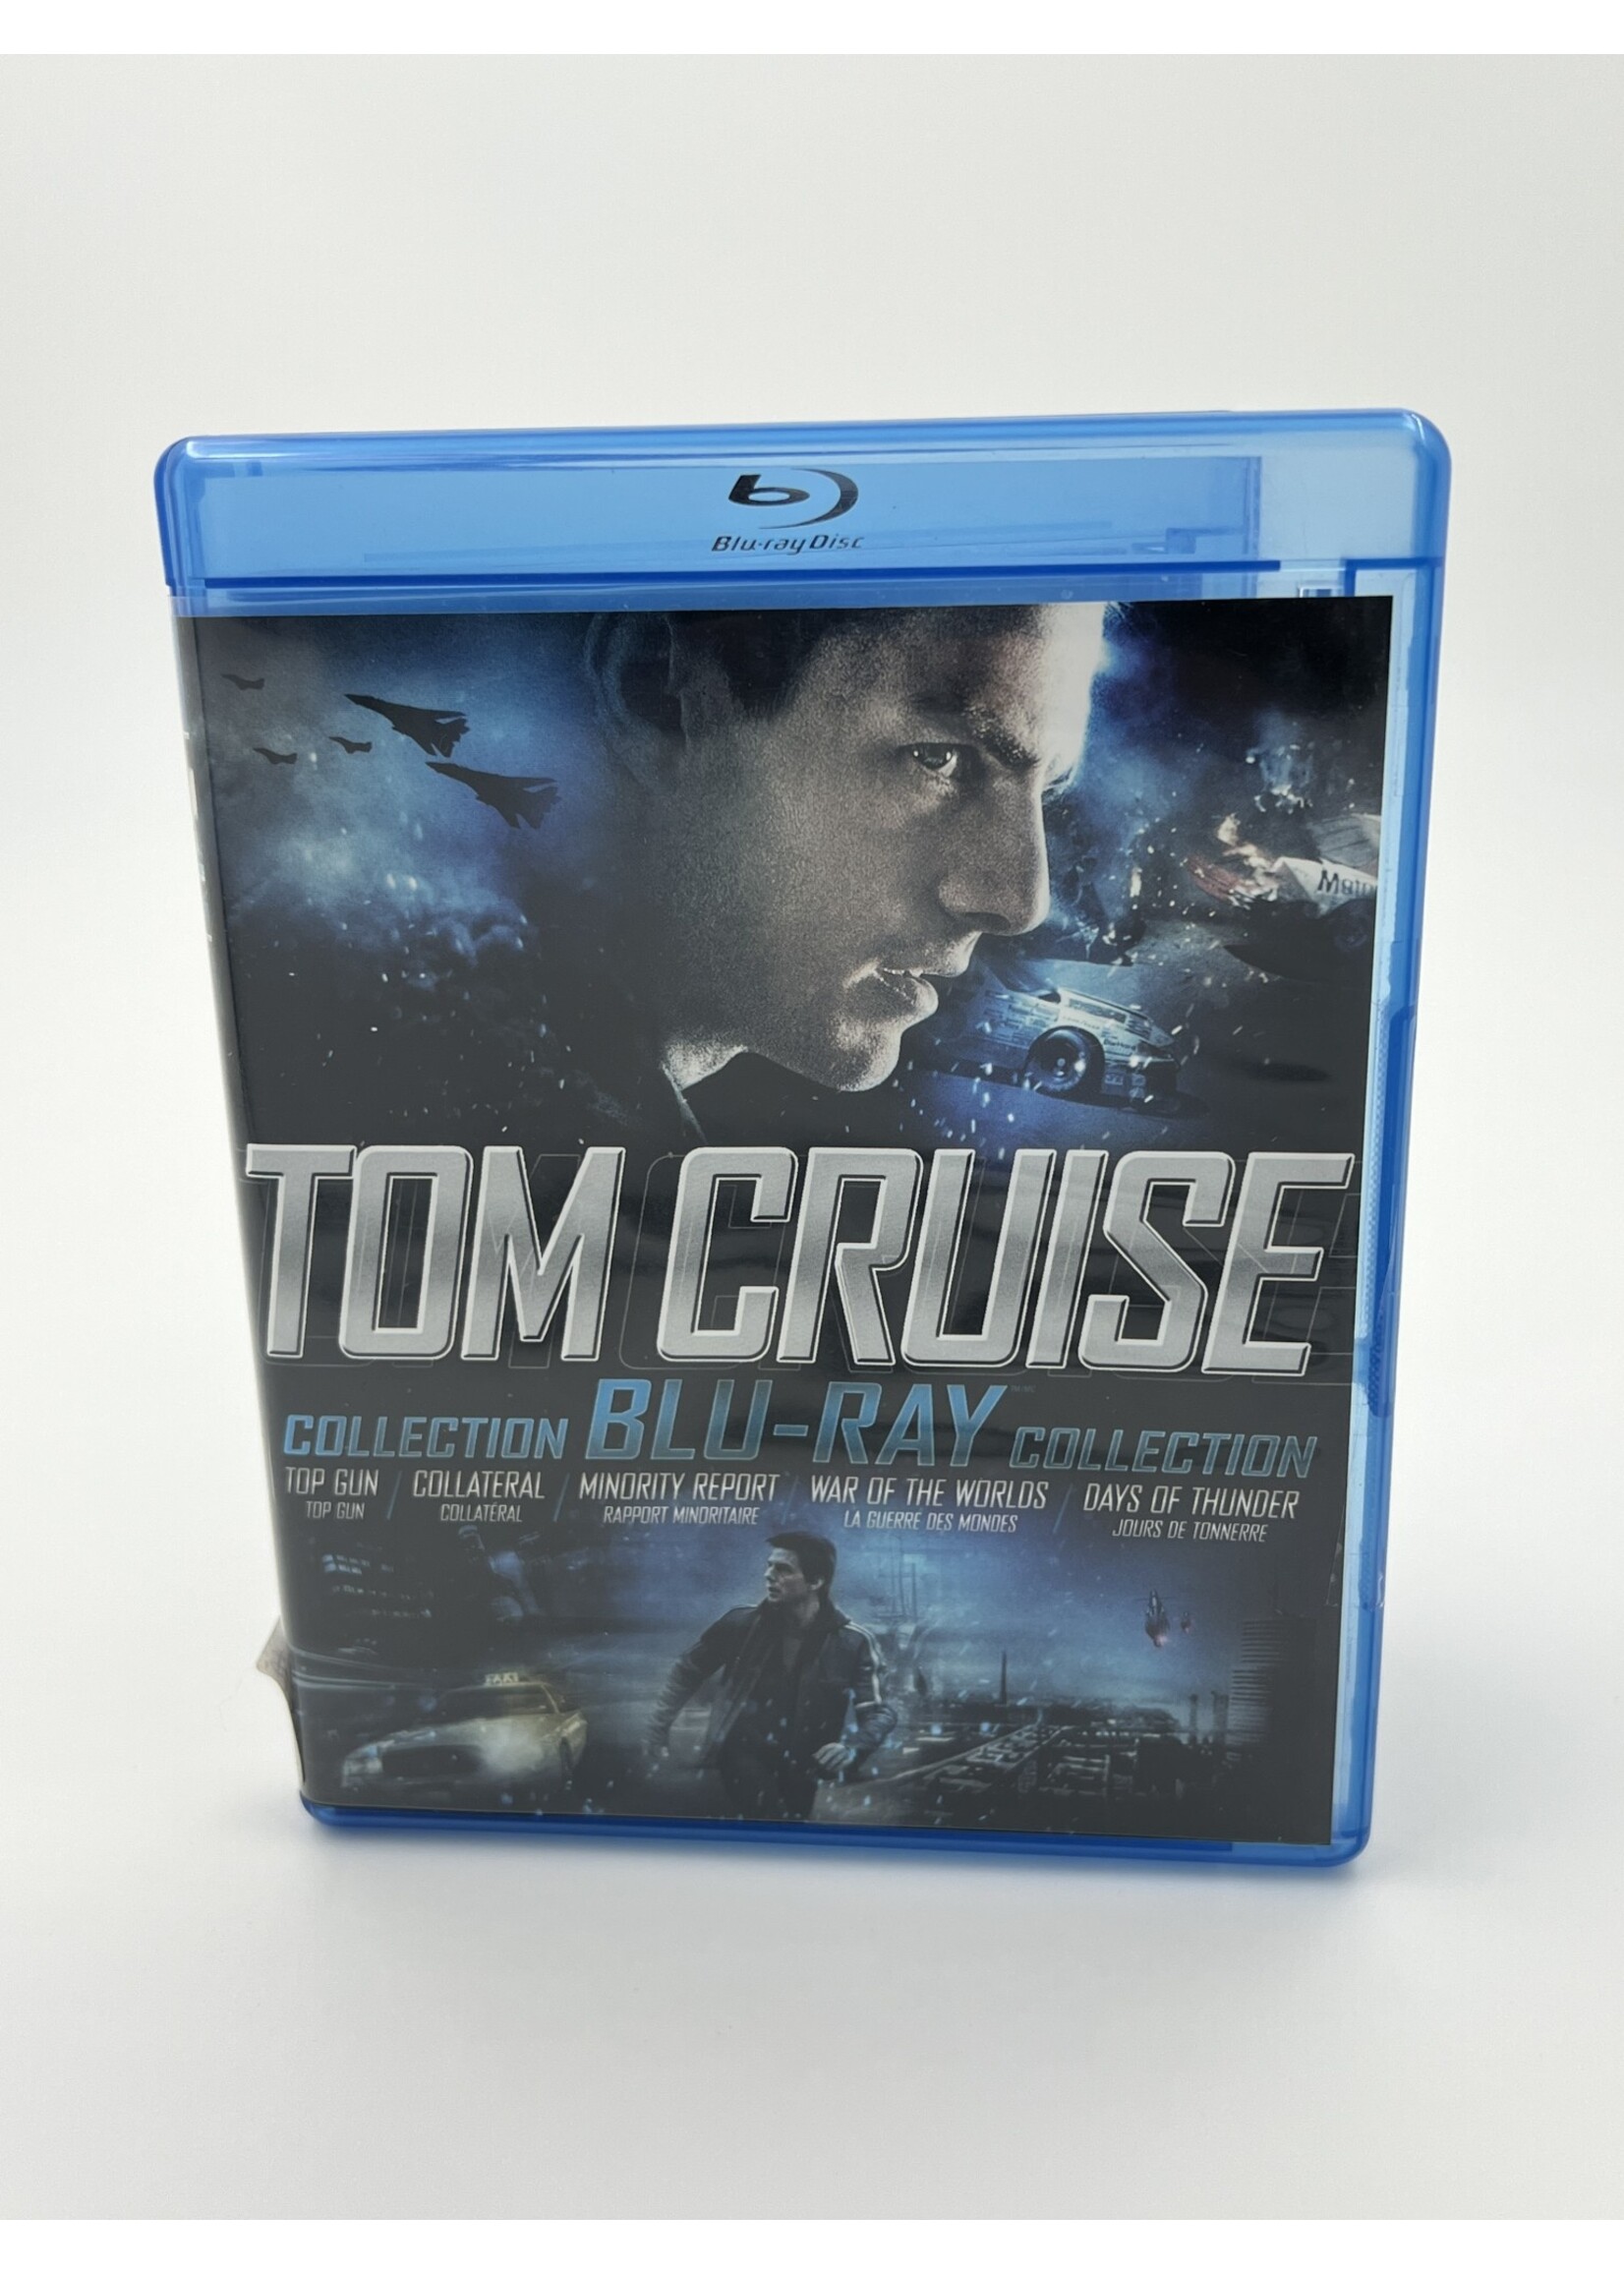 Bluray   Tom Cruise Collection 5 Movies Bluray